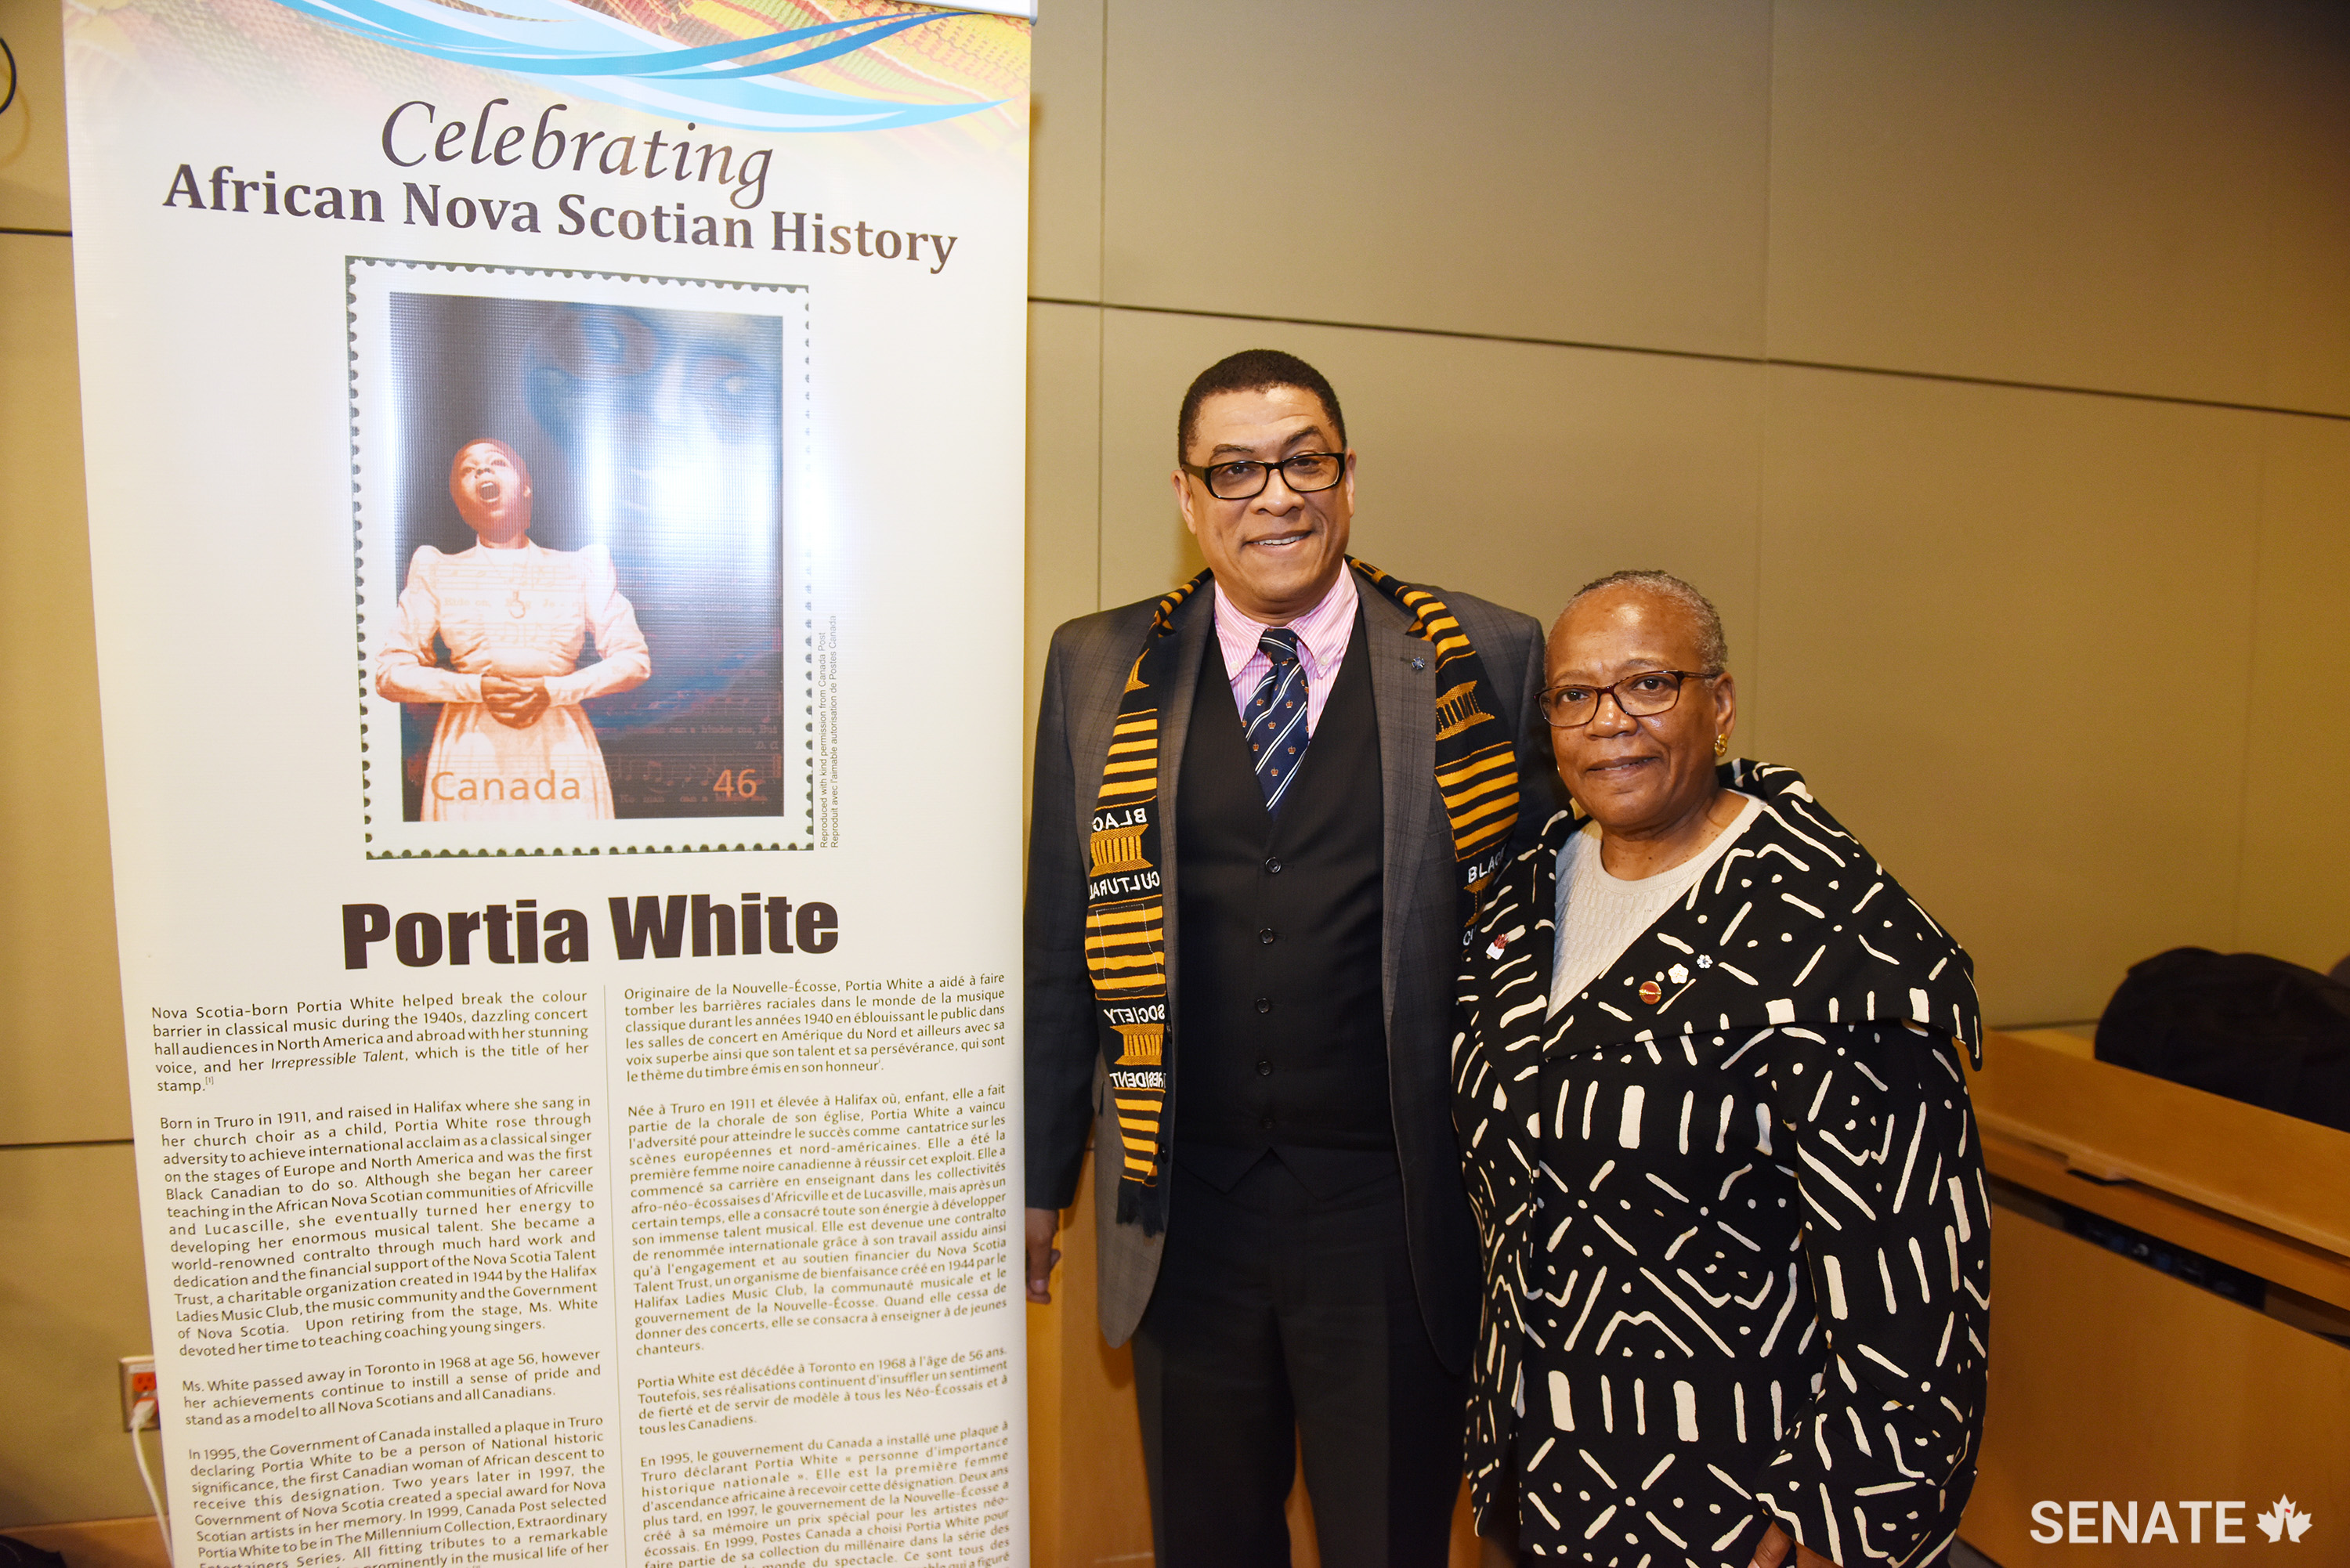 Committee chair Senator Wanda Thomas Bernard, right, chats with Craig Smith, chair and president of the Black Cultural Society for Nova Scotia.